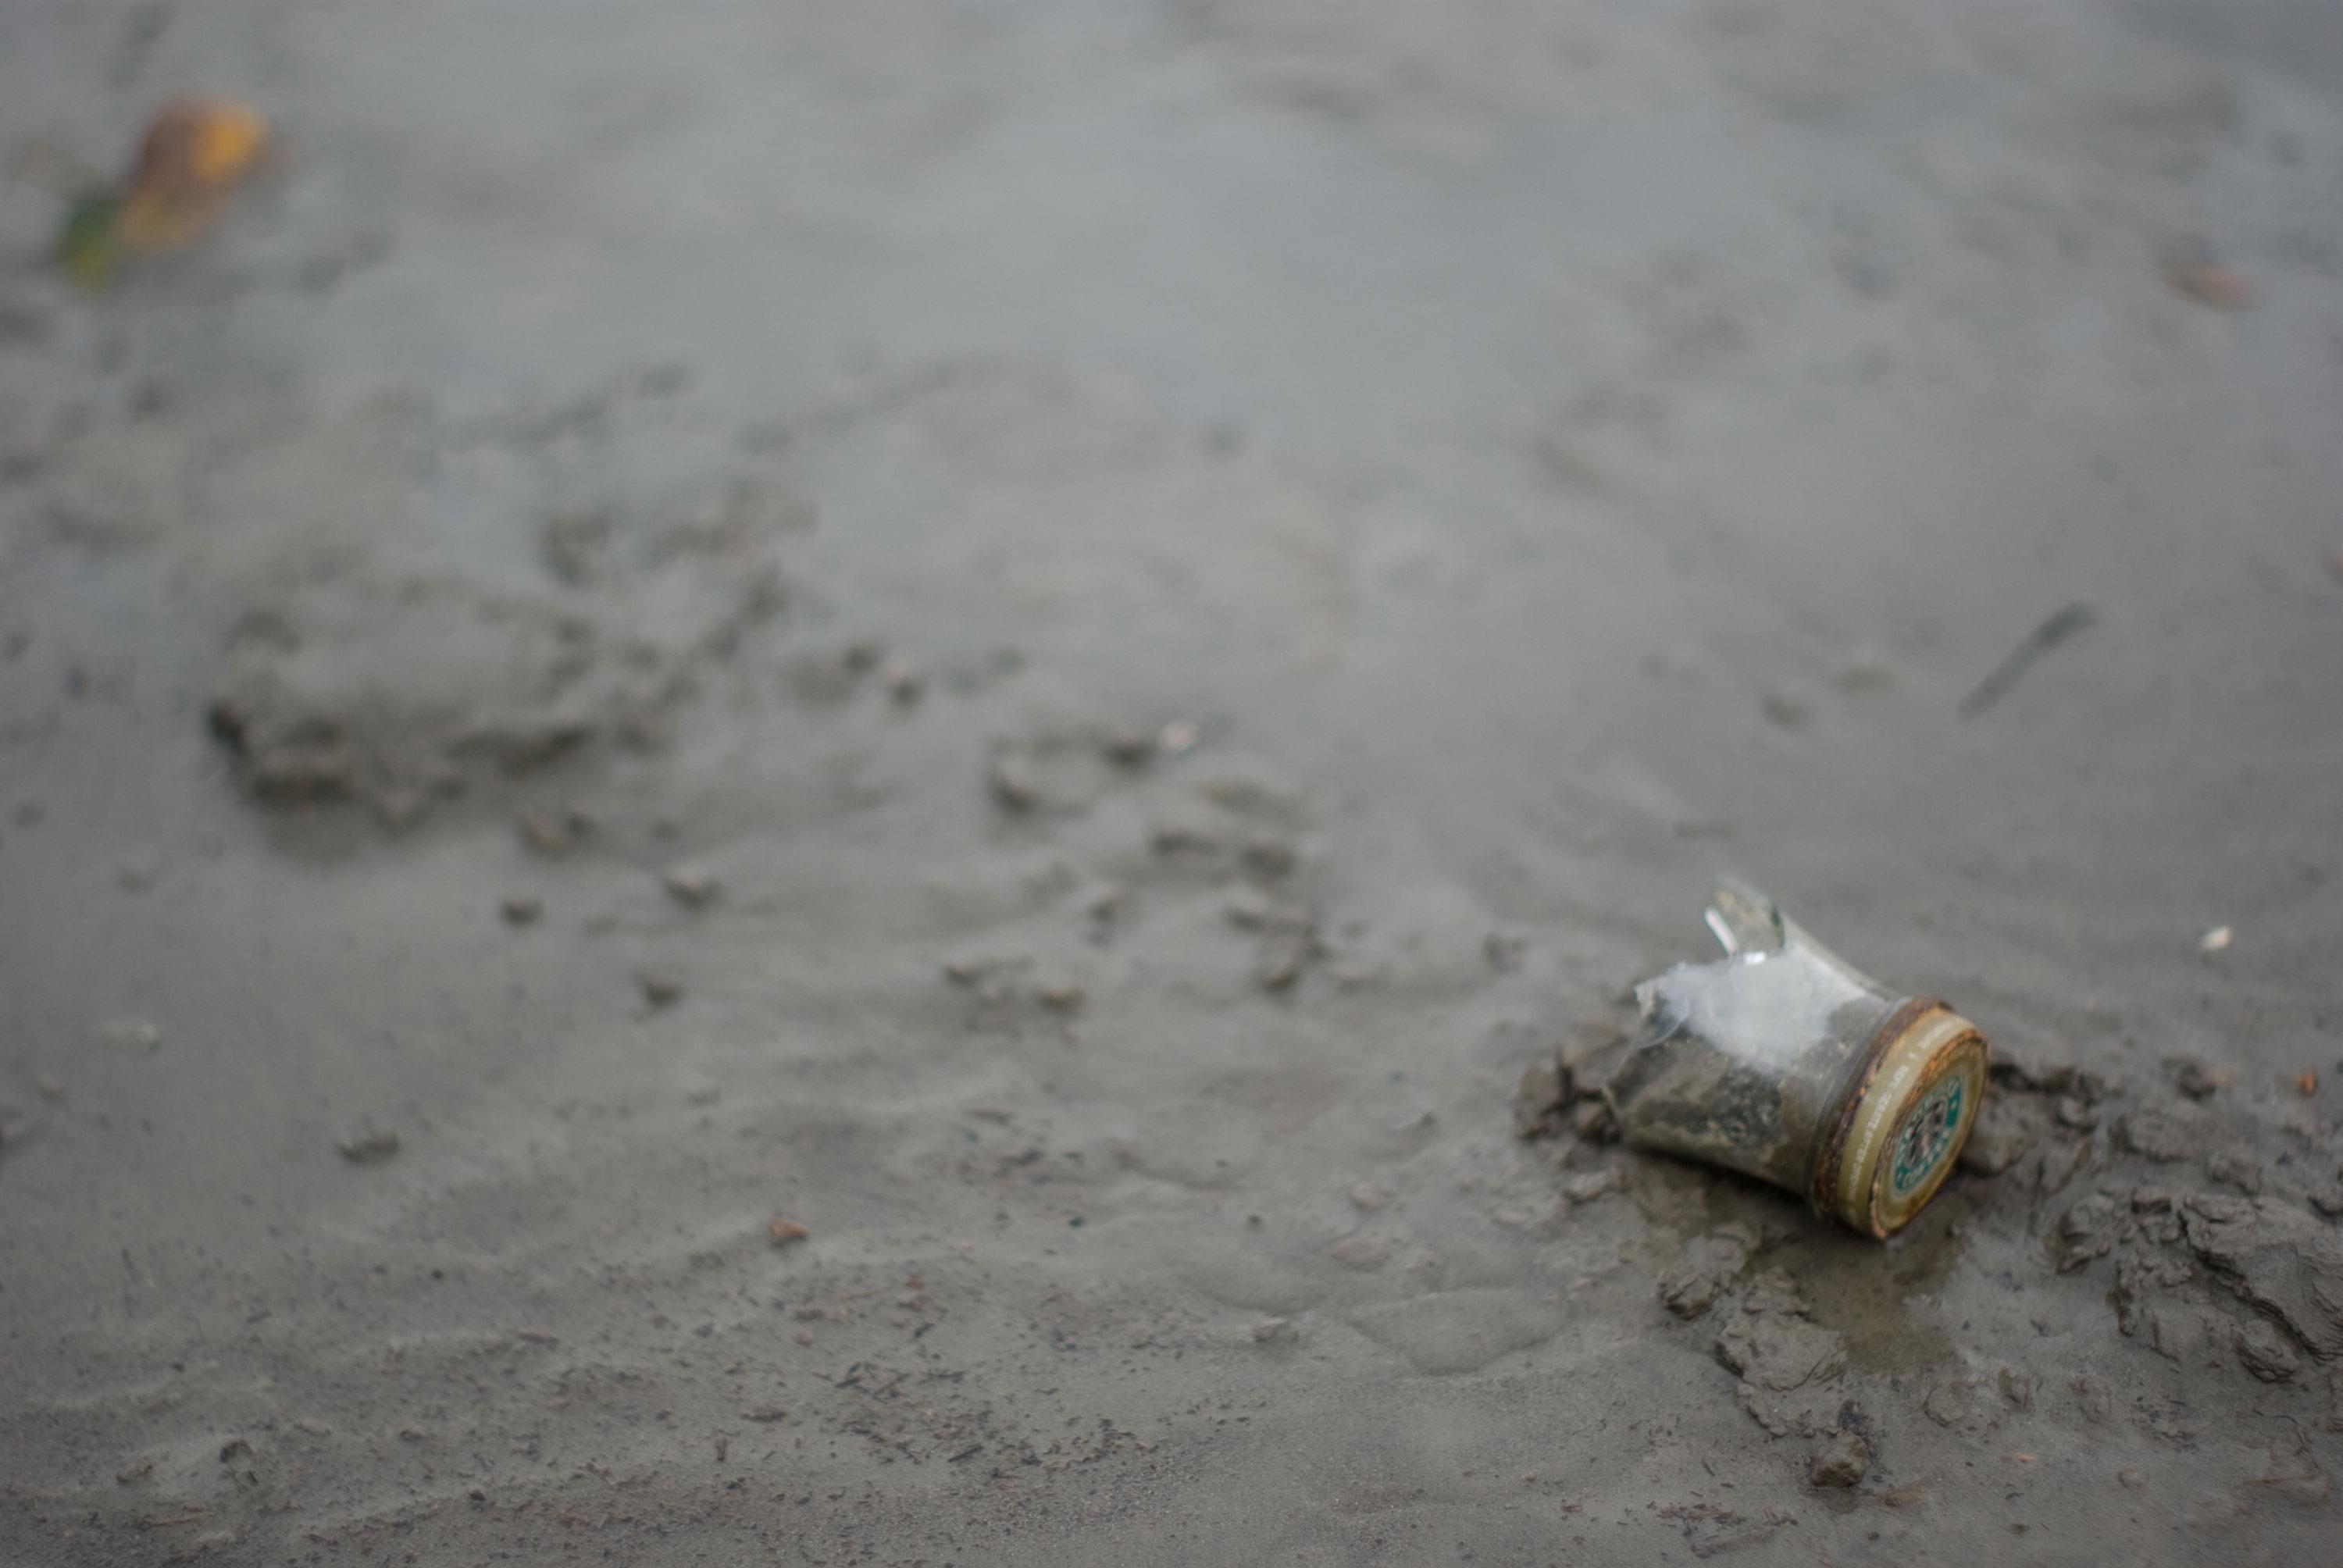 A photo of a broken starbucks bottle in the sand